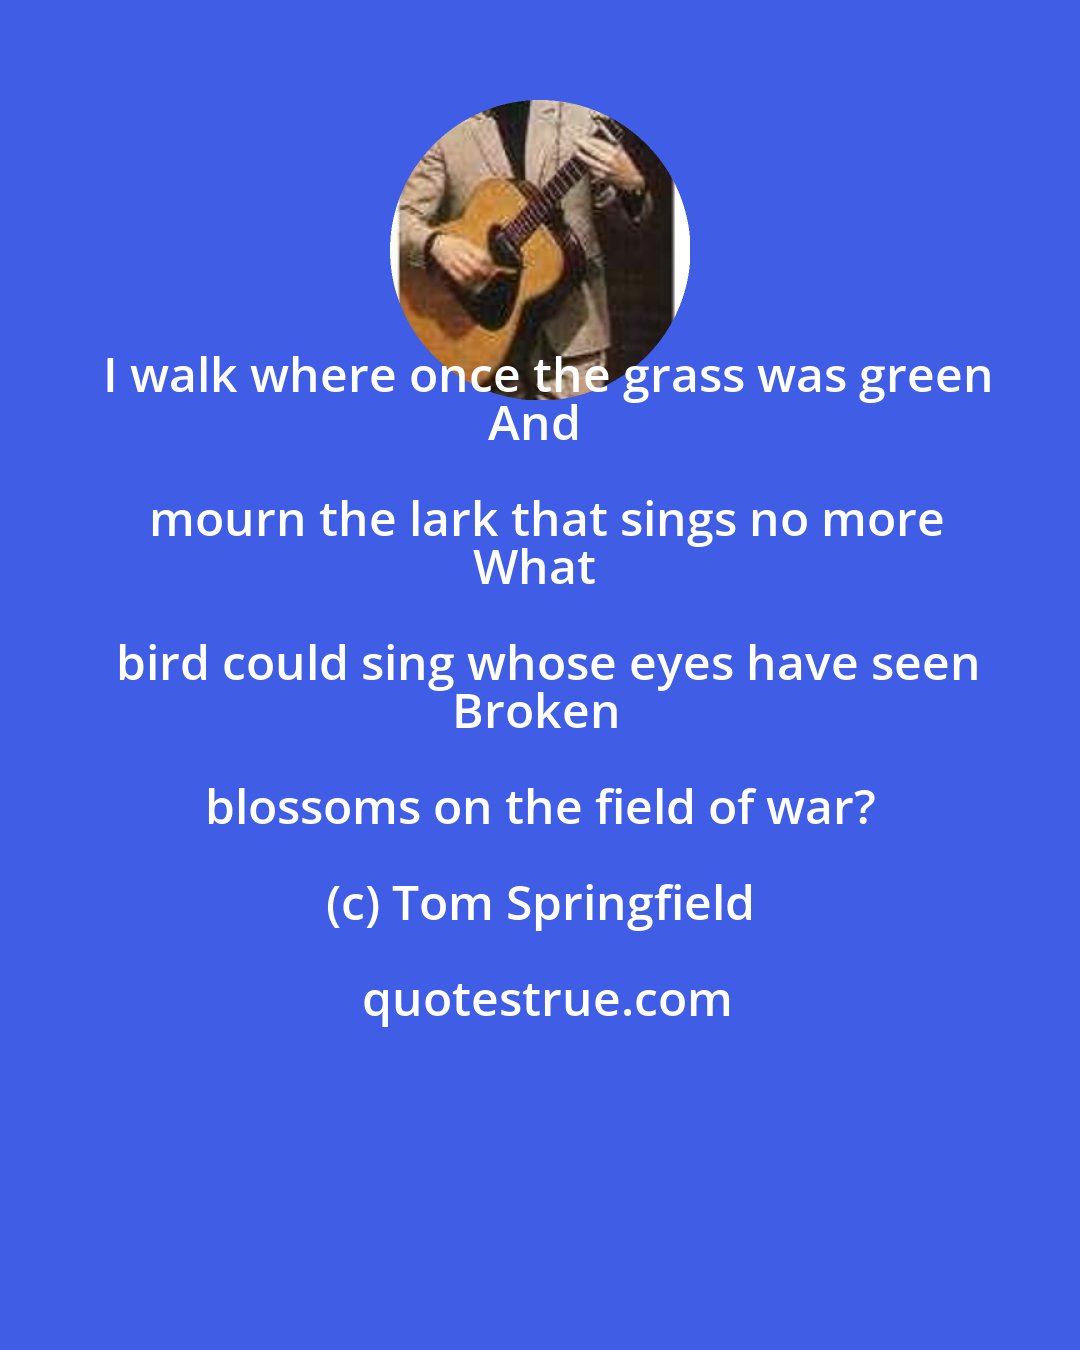 Tom Springfield: I walk where once the grass was green
And mourn the lark that sings no more
What bird could sing whose eyes have seen
Broken blossoms on the field of war?